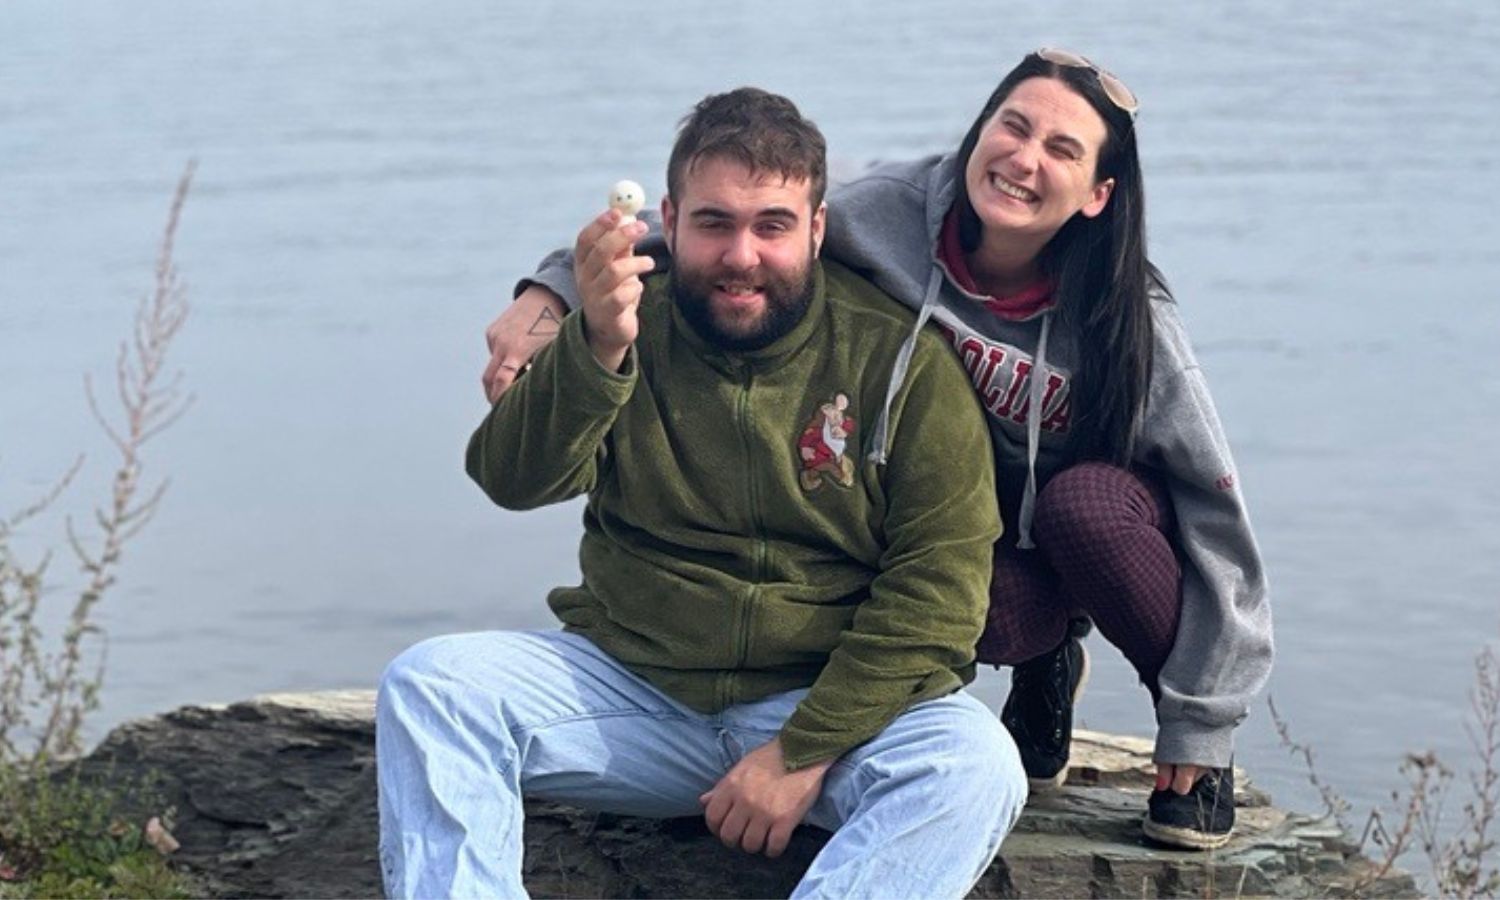 Two people smiling sitting on a rock